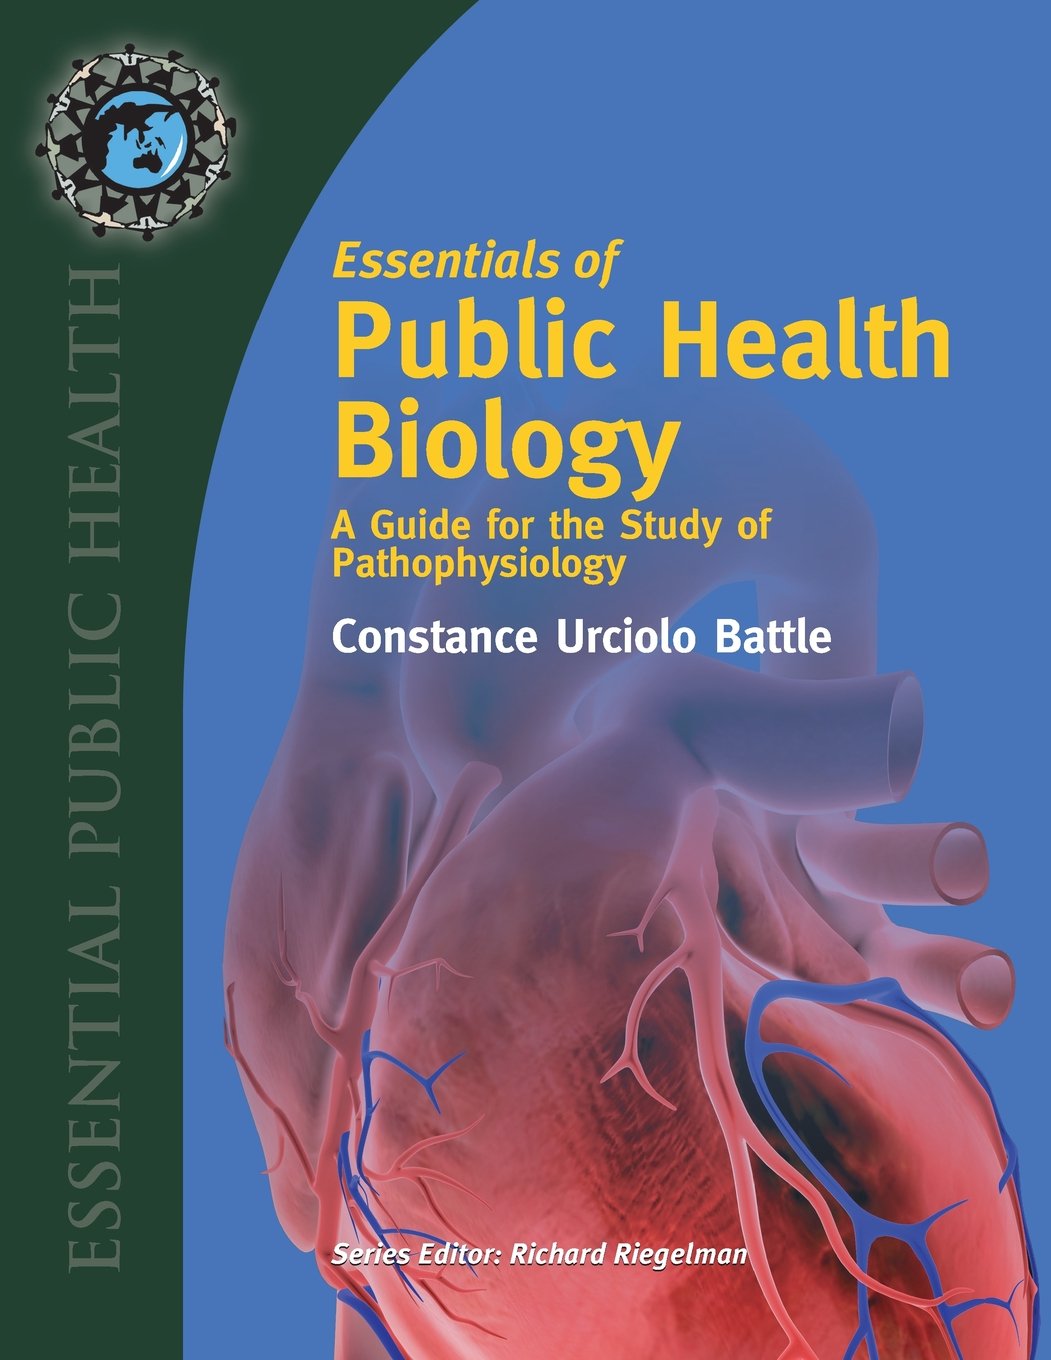 Essentials of public health biology a guide for the study of pathophysiology ed. Constance Urciolo Battle